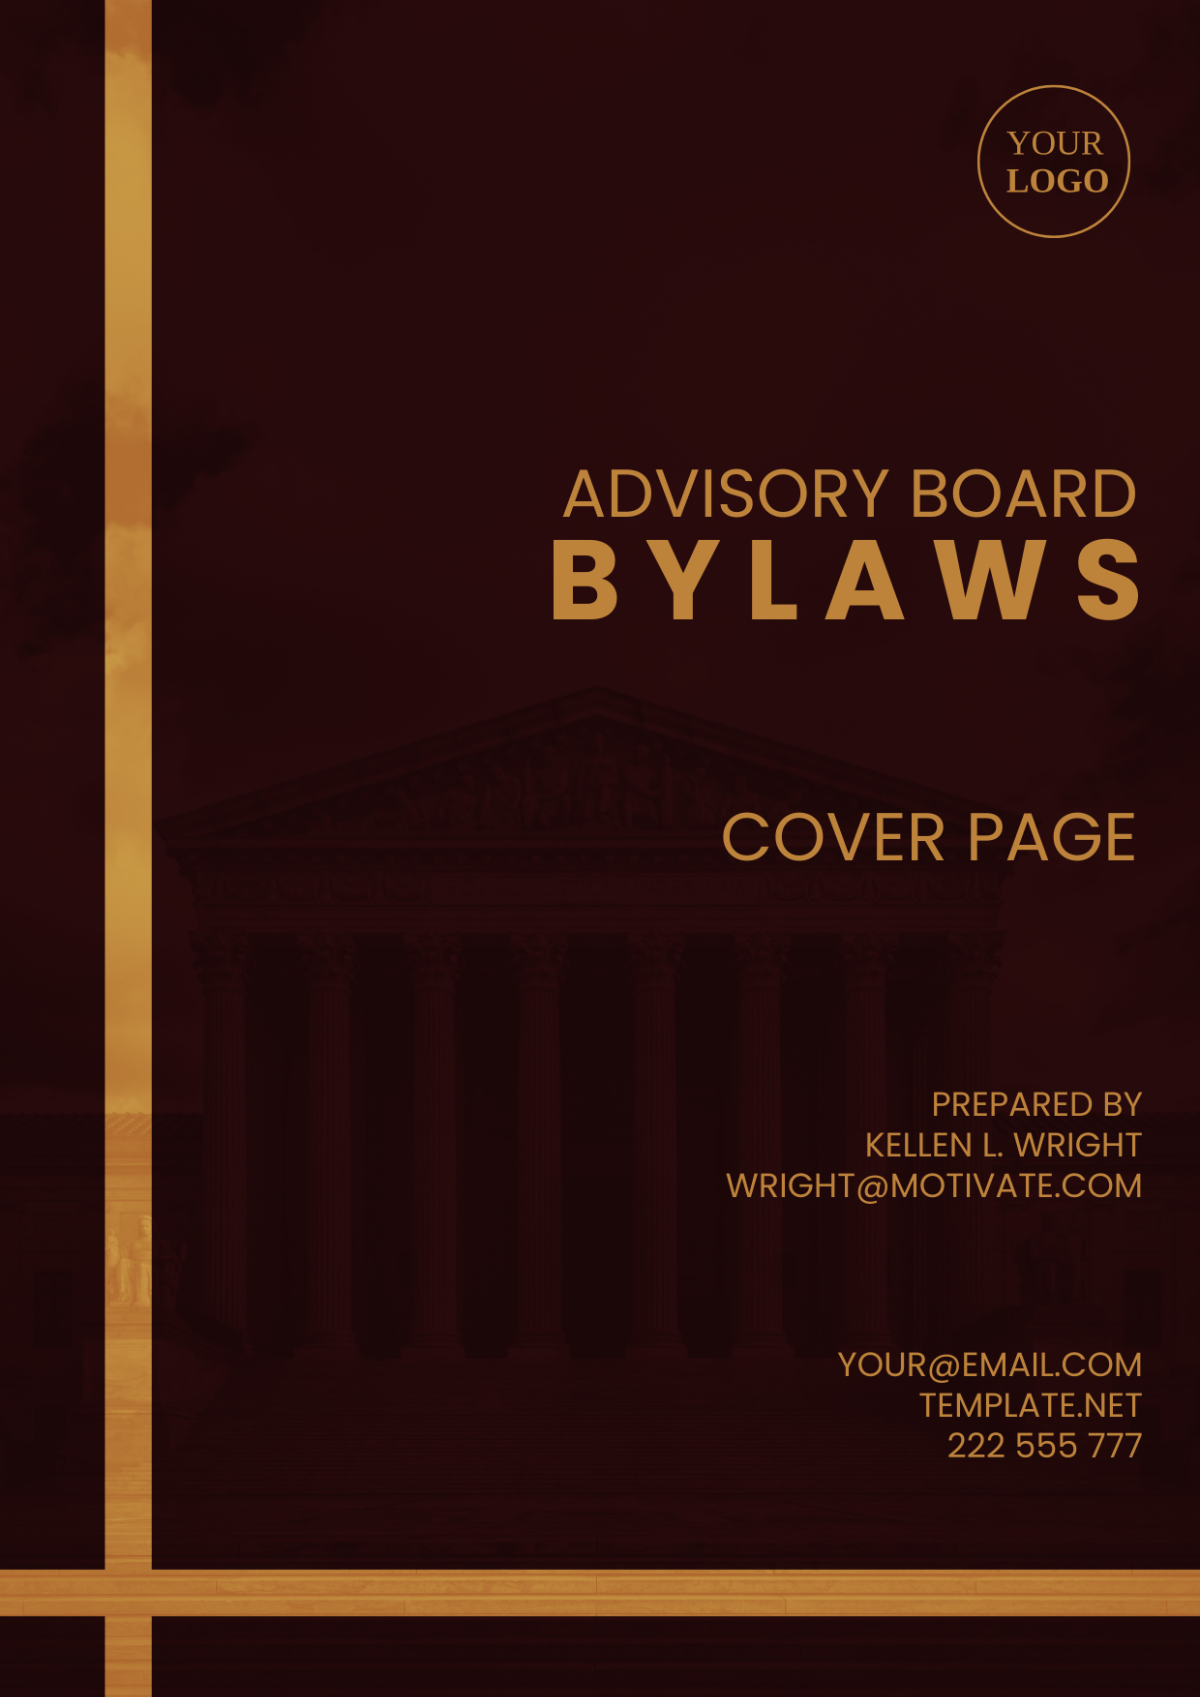 Advisory Board Bylaws Cover Page Template